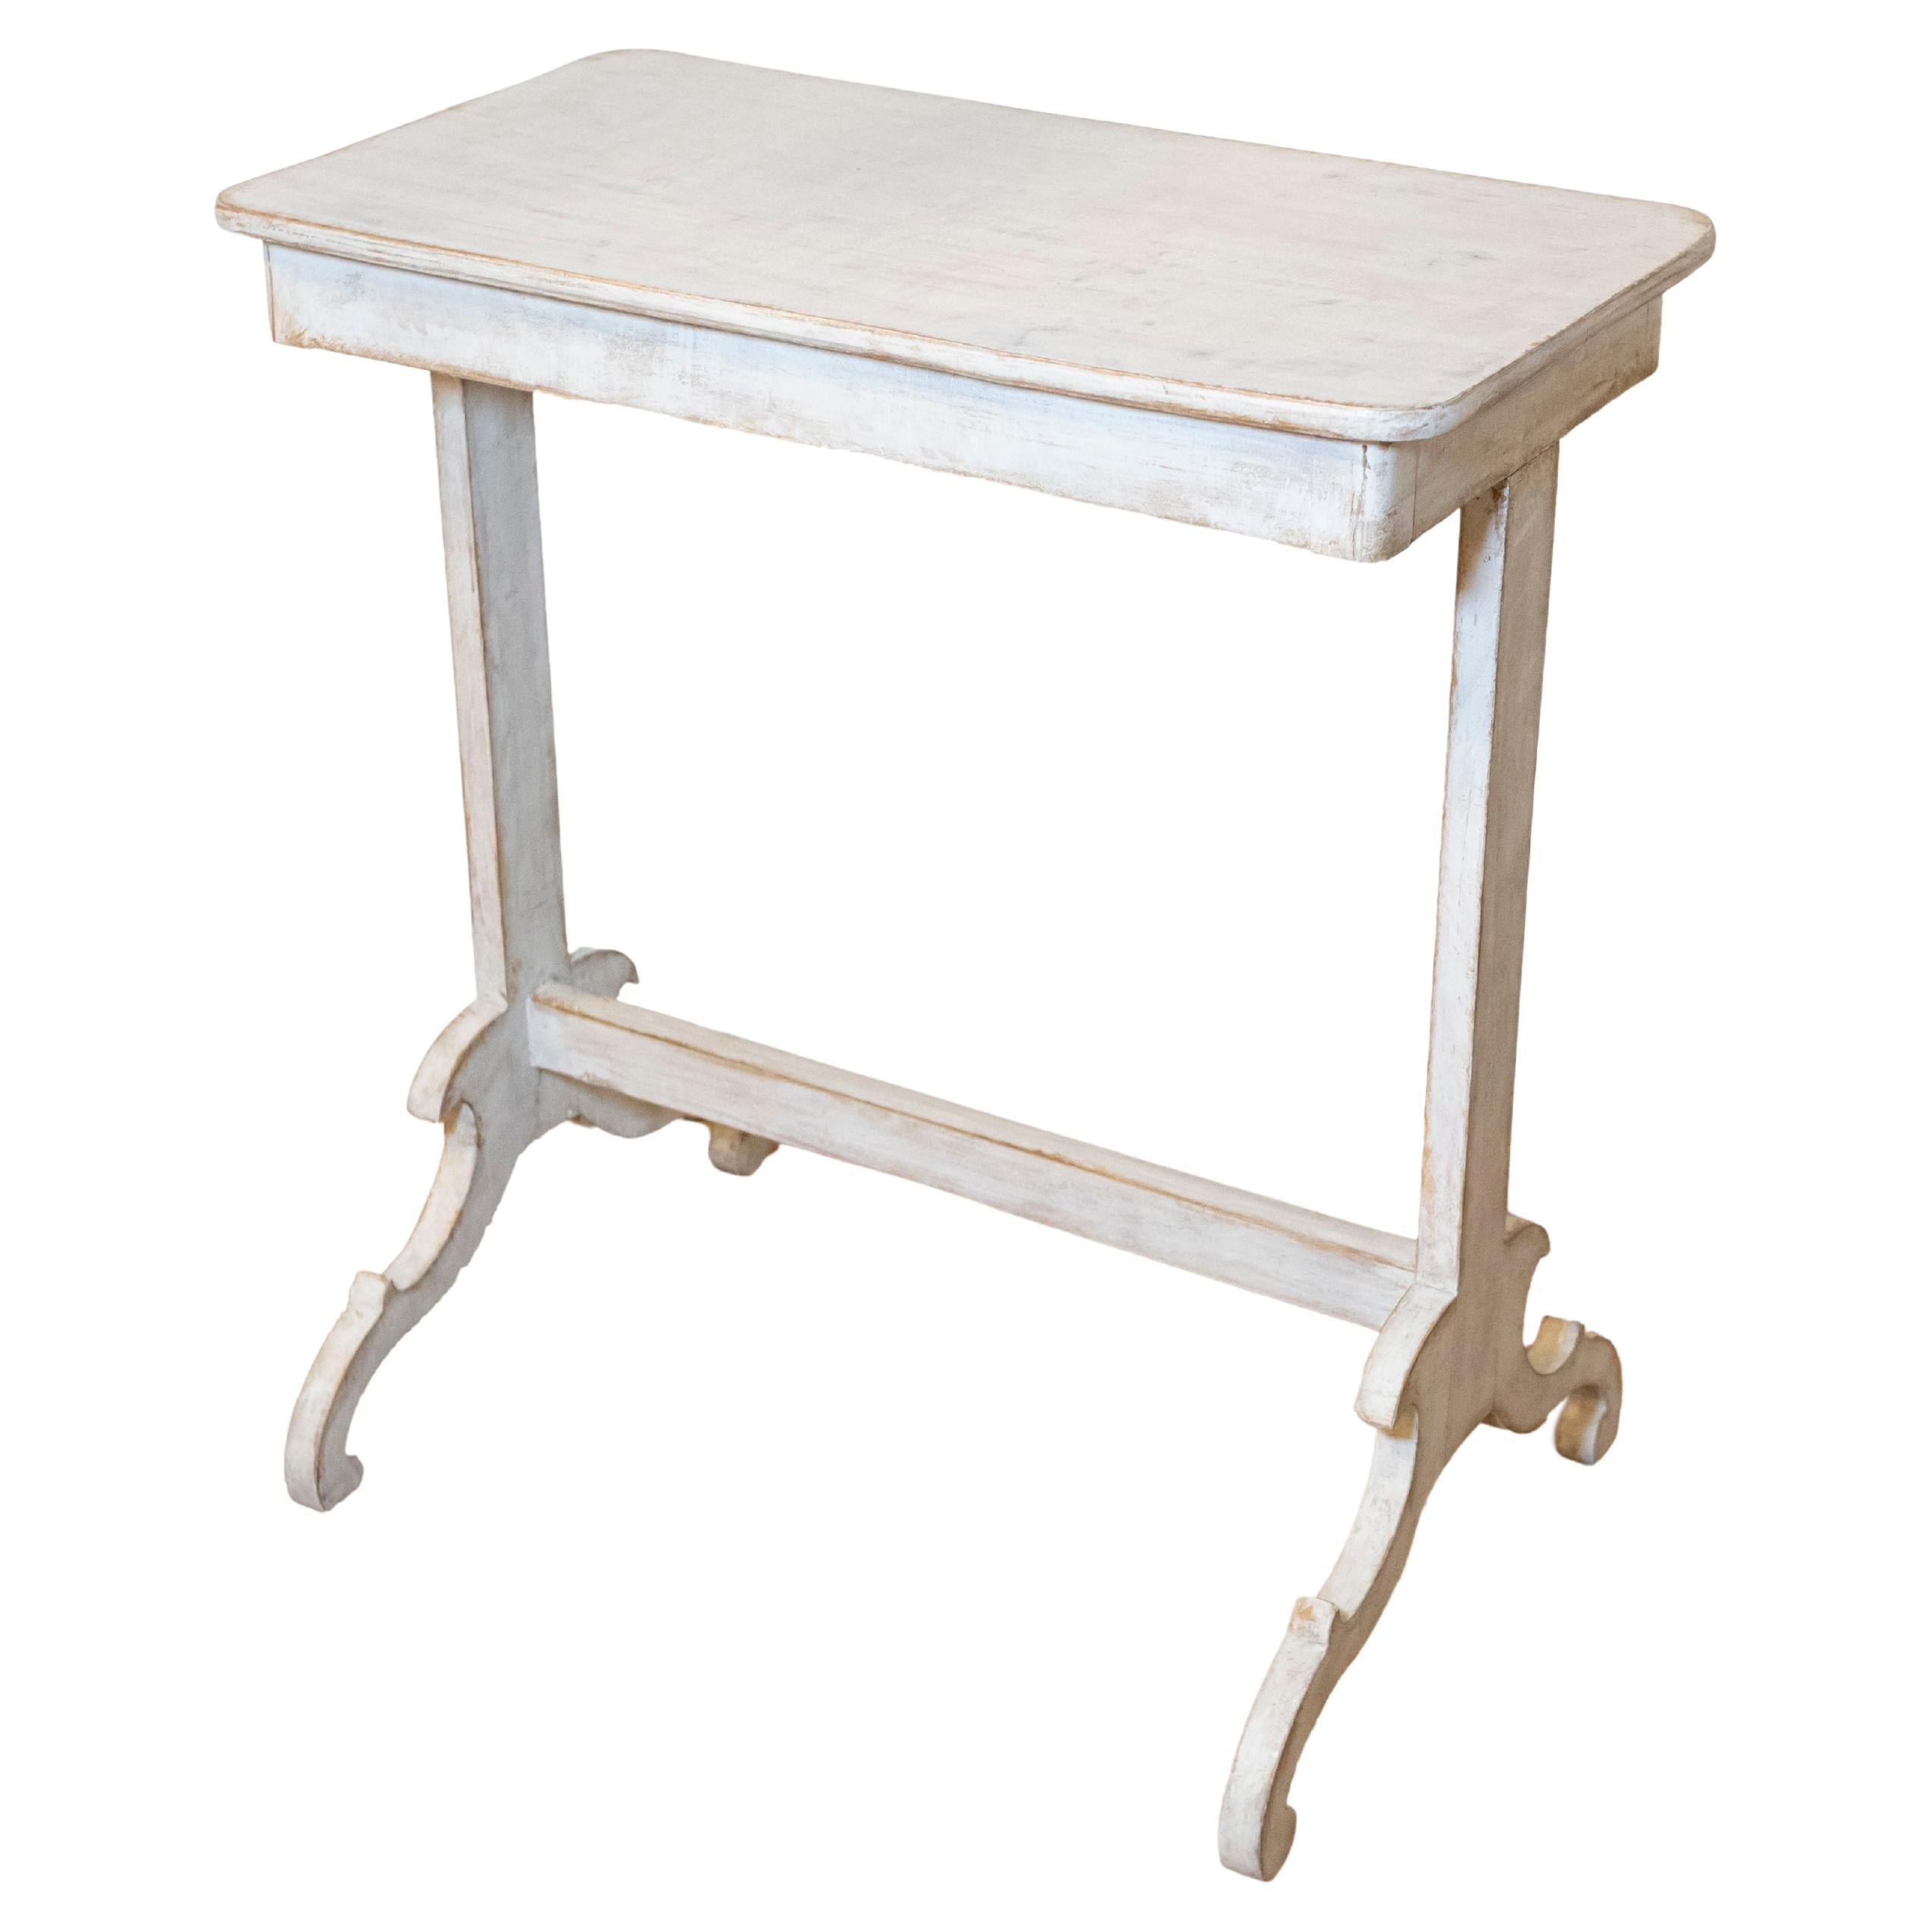 19th Century Swedish Light Gray Painted Side Table with Carved Trestle Base For Sale